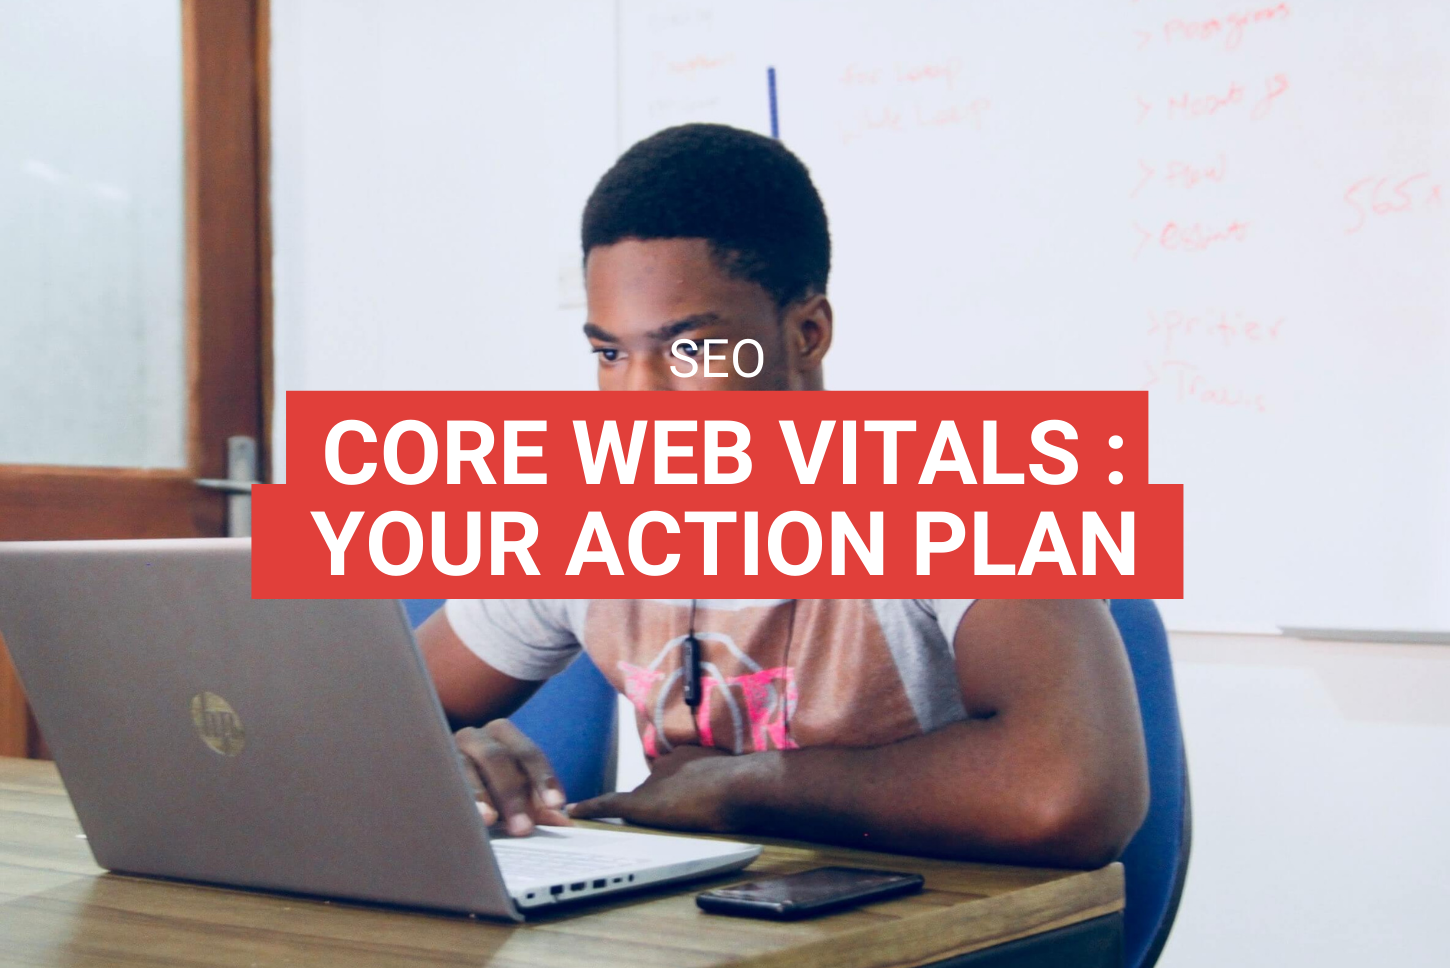 CORE WEB VITALS, YOUR SEO ACTION PLAN IN 4 STEPS